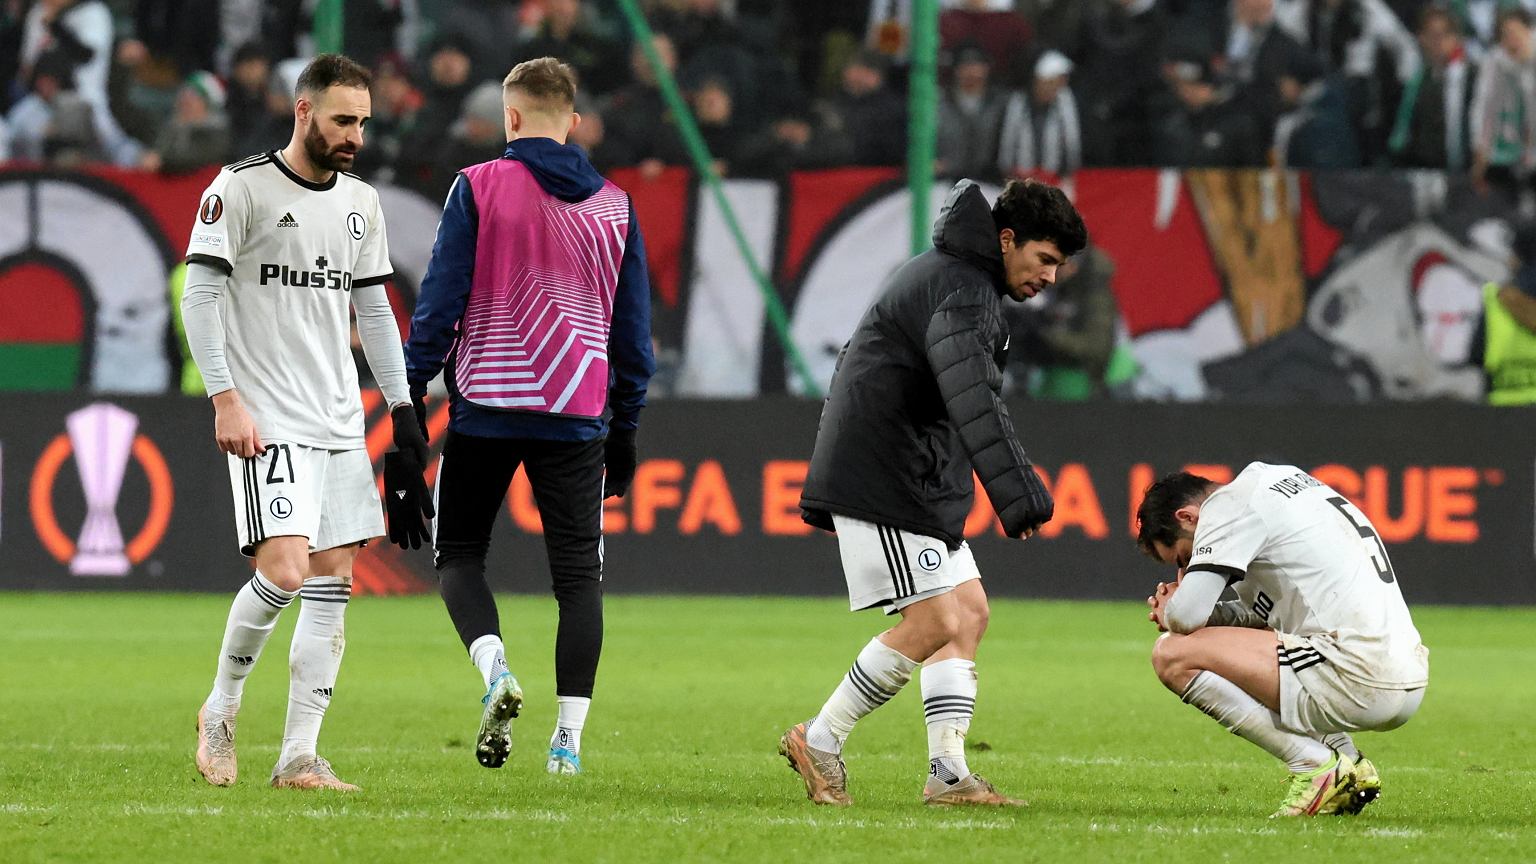 New information after the scandal about coach Legia.  “They are scared, they don't want to talk about what happened.” Football